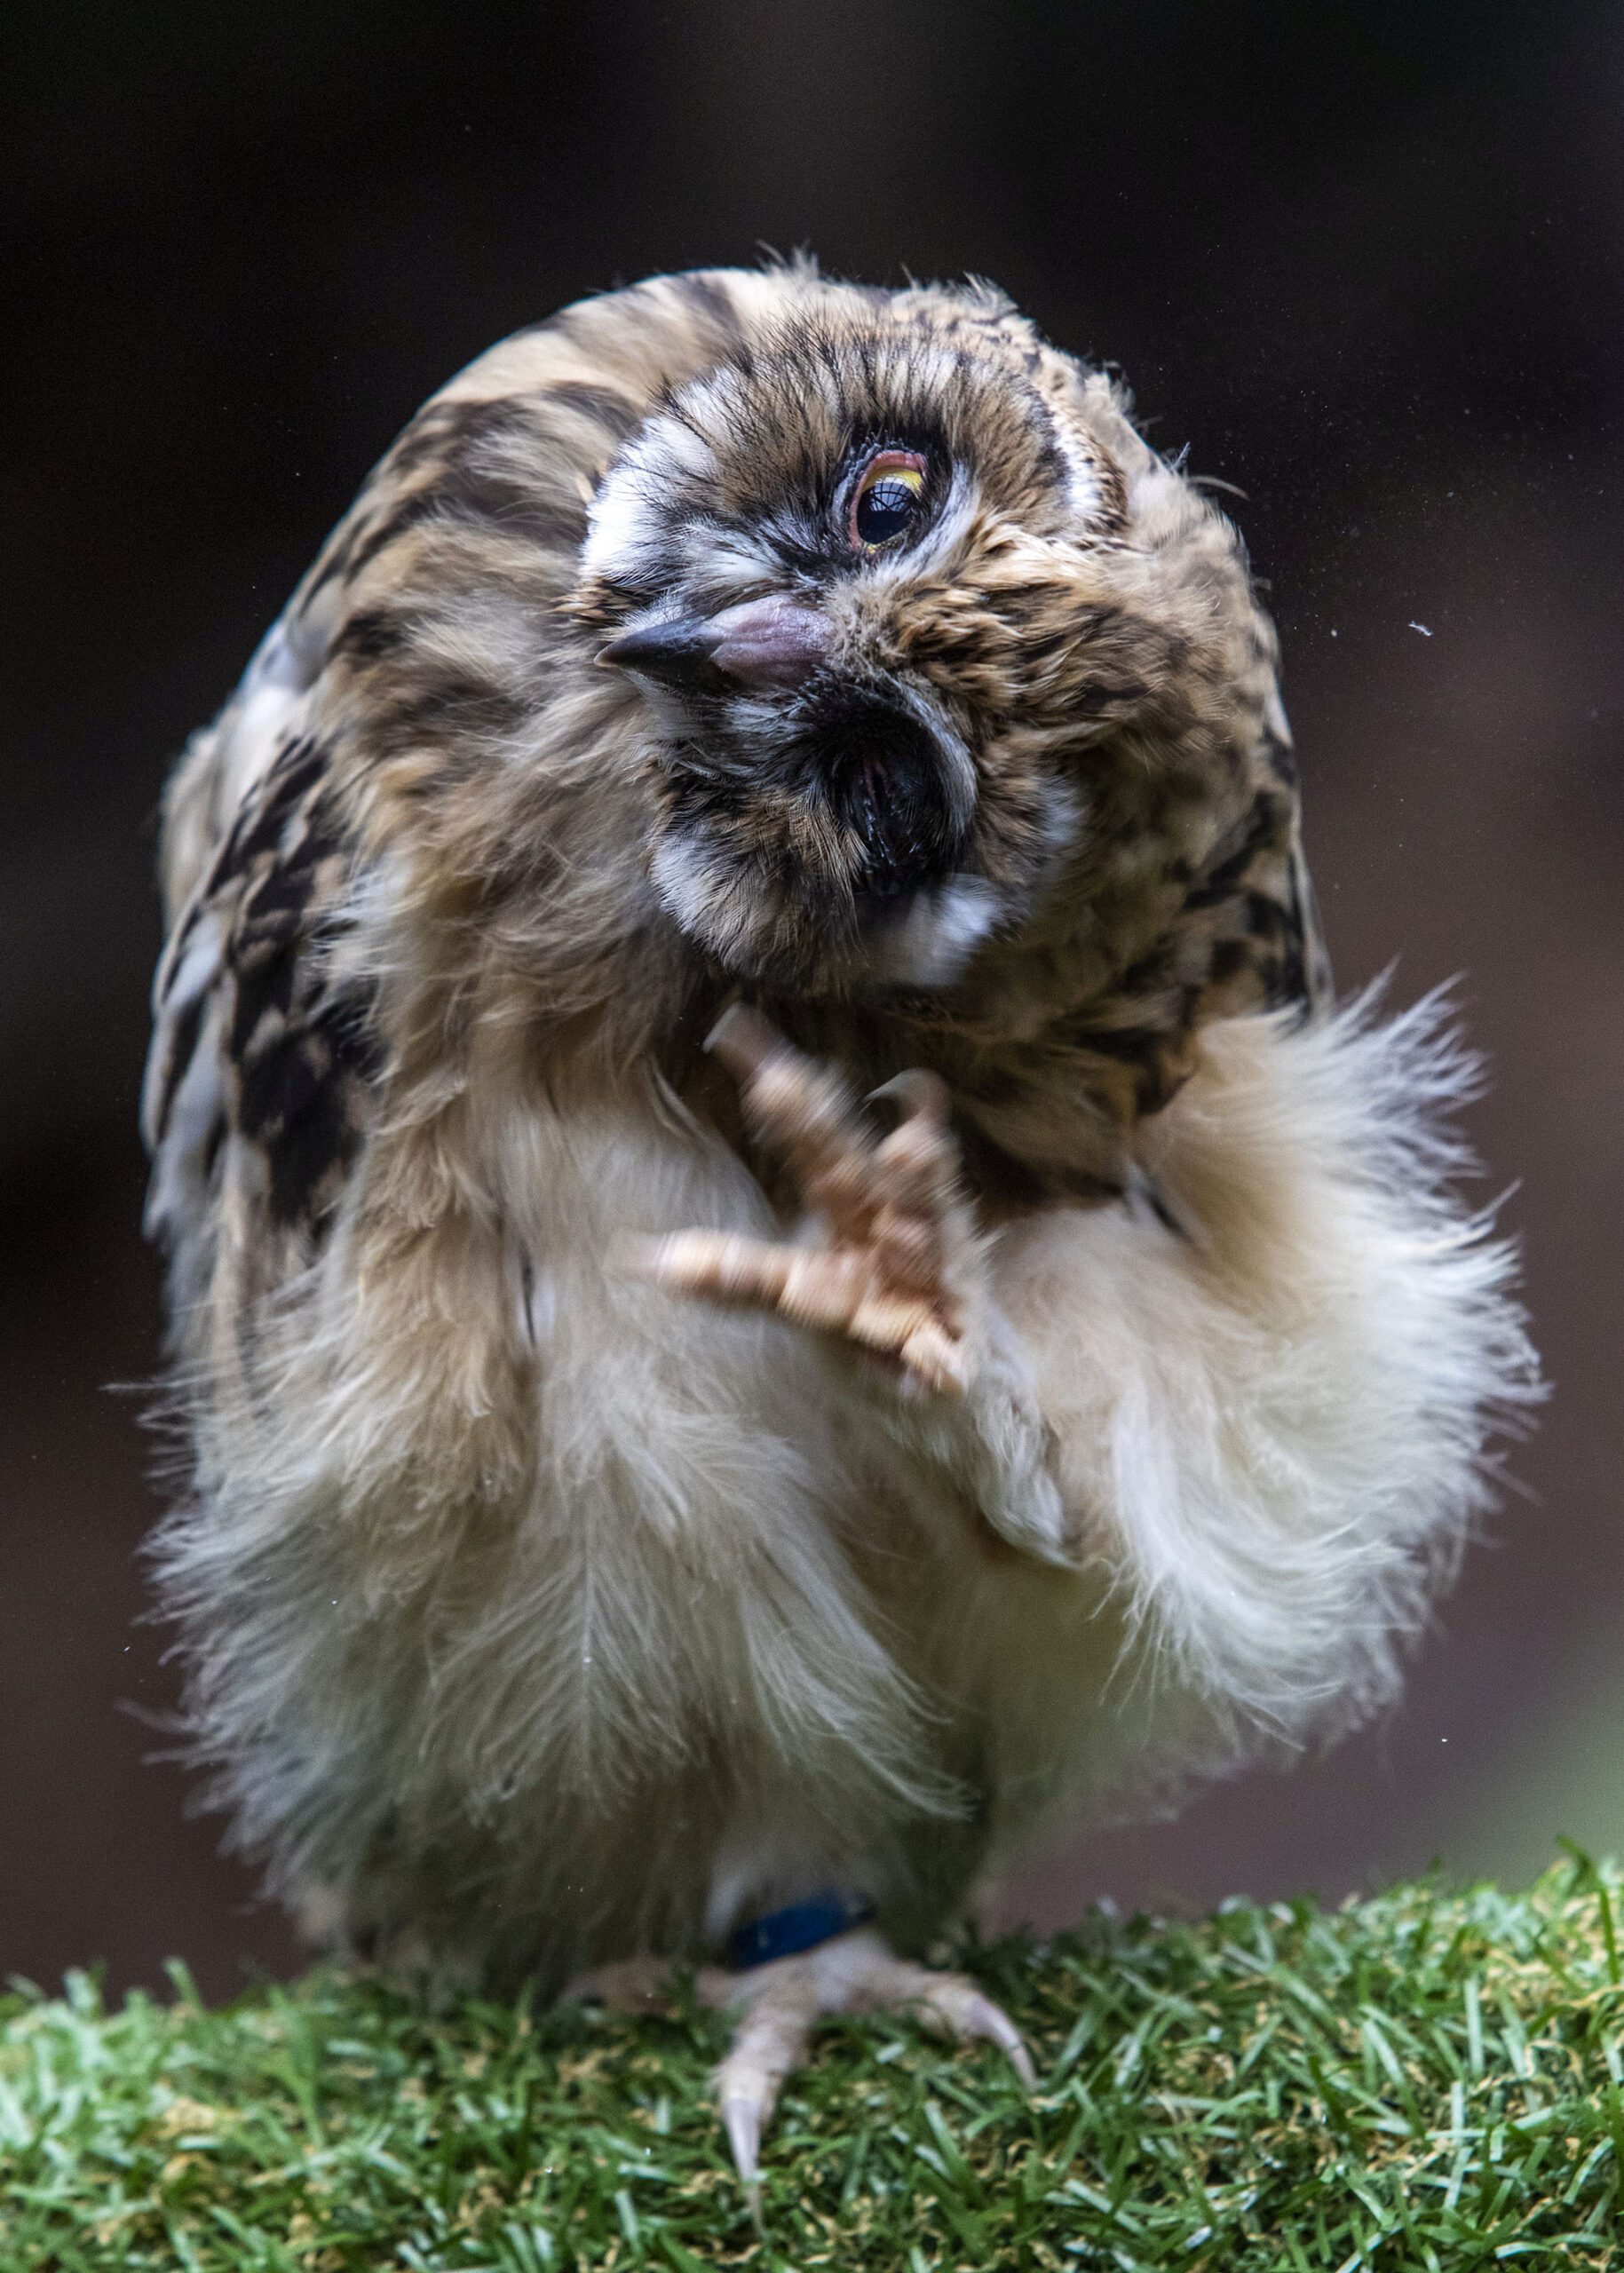 Machrihanish, the seven-week-old short-eared owl, at the Scottish Owl Center in West Lothian, which is the first ever to be bred in captivity in Scotland. July 2, 2022. (SWNS/Zenger)